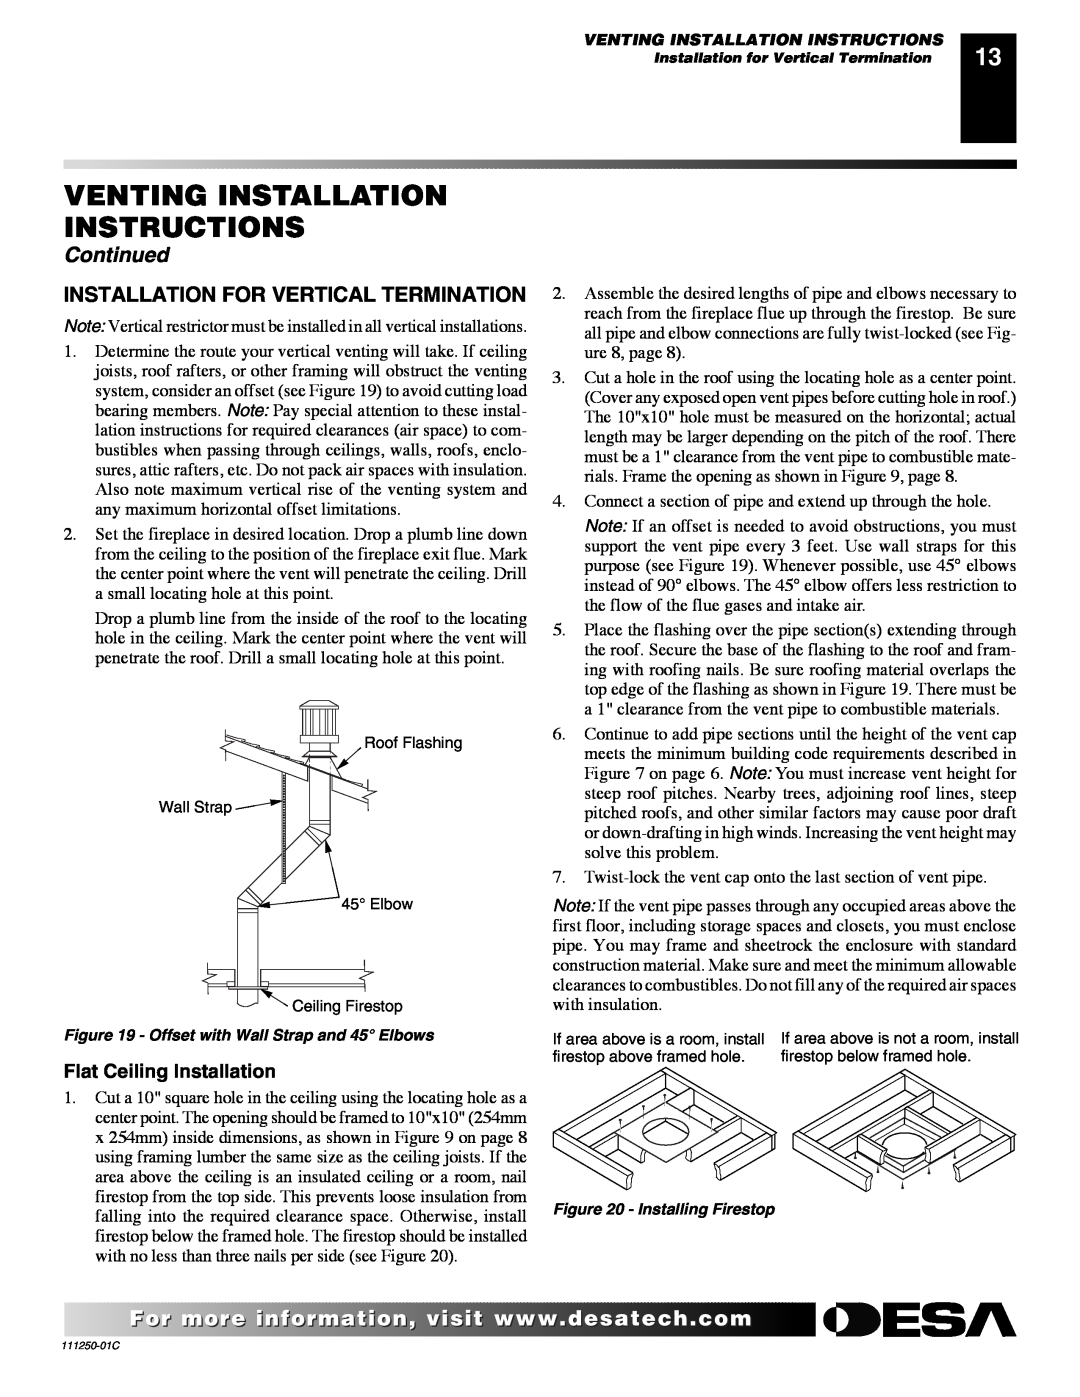 Desa (V)T36NA SERIES Installation For Vertical Termination, Venting Installation Instructions, Continued 